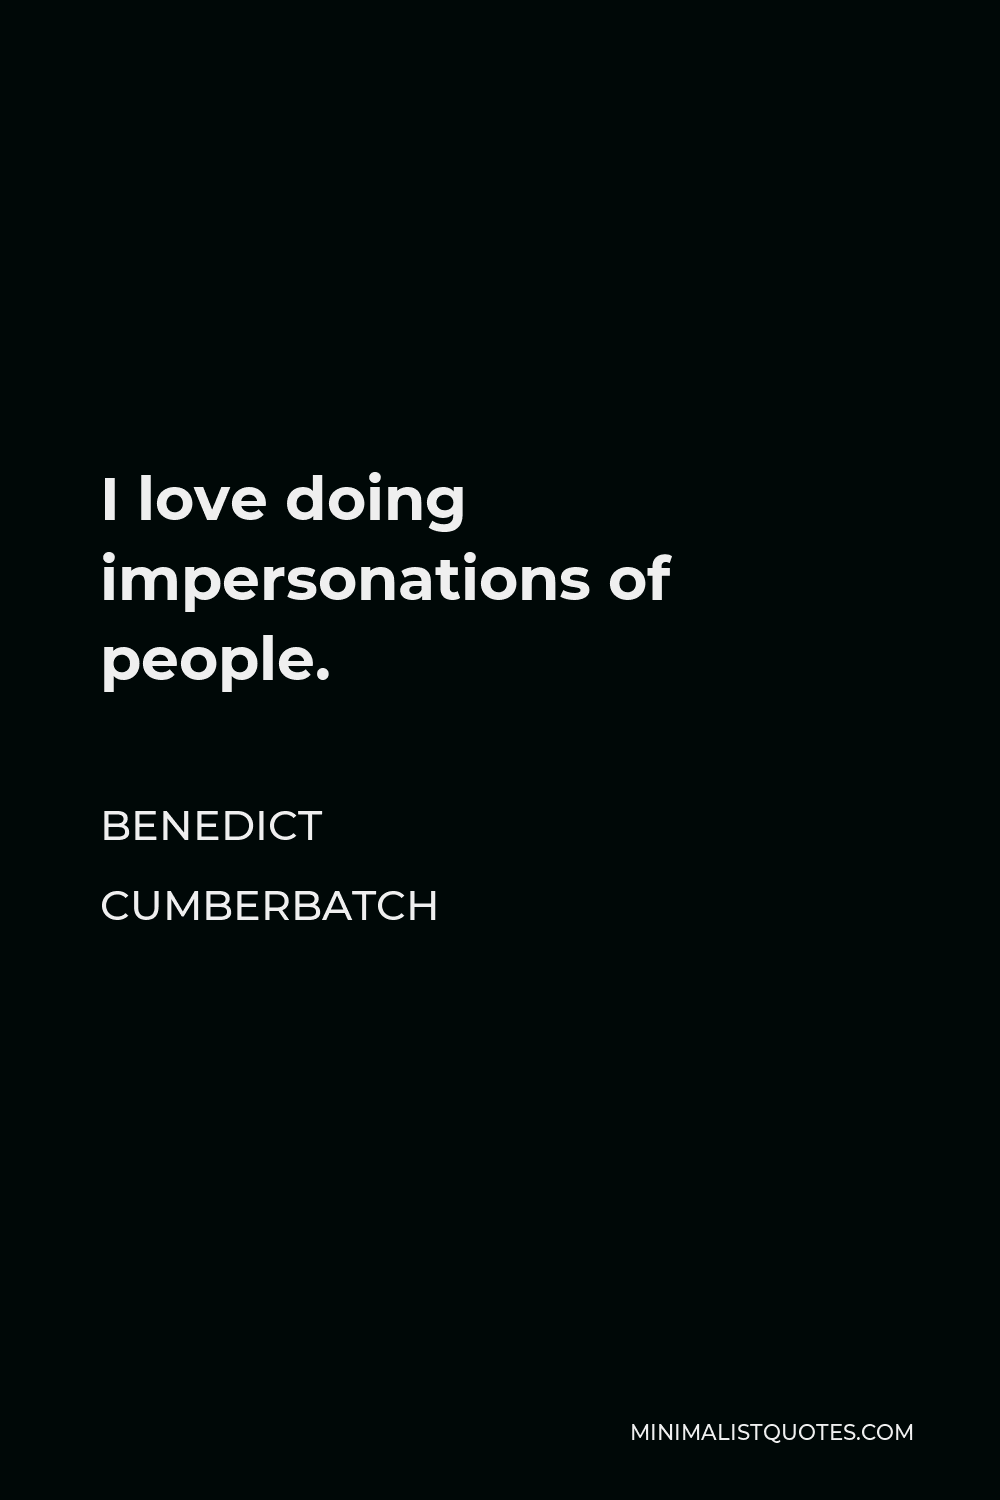 Benedict Cumberbatch Quote - I love doing impersonations of people.